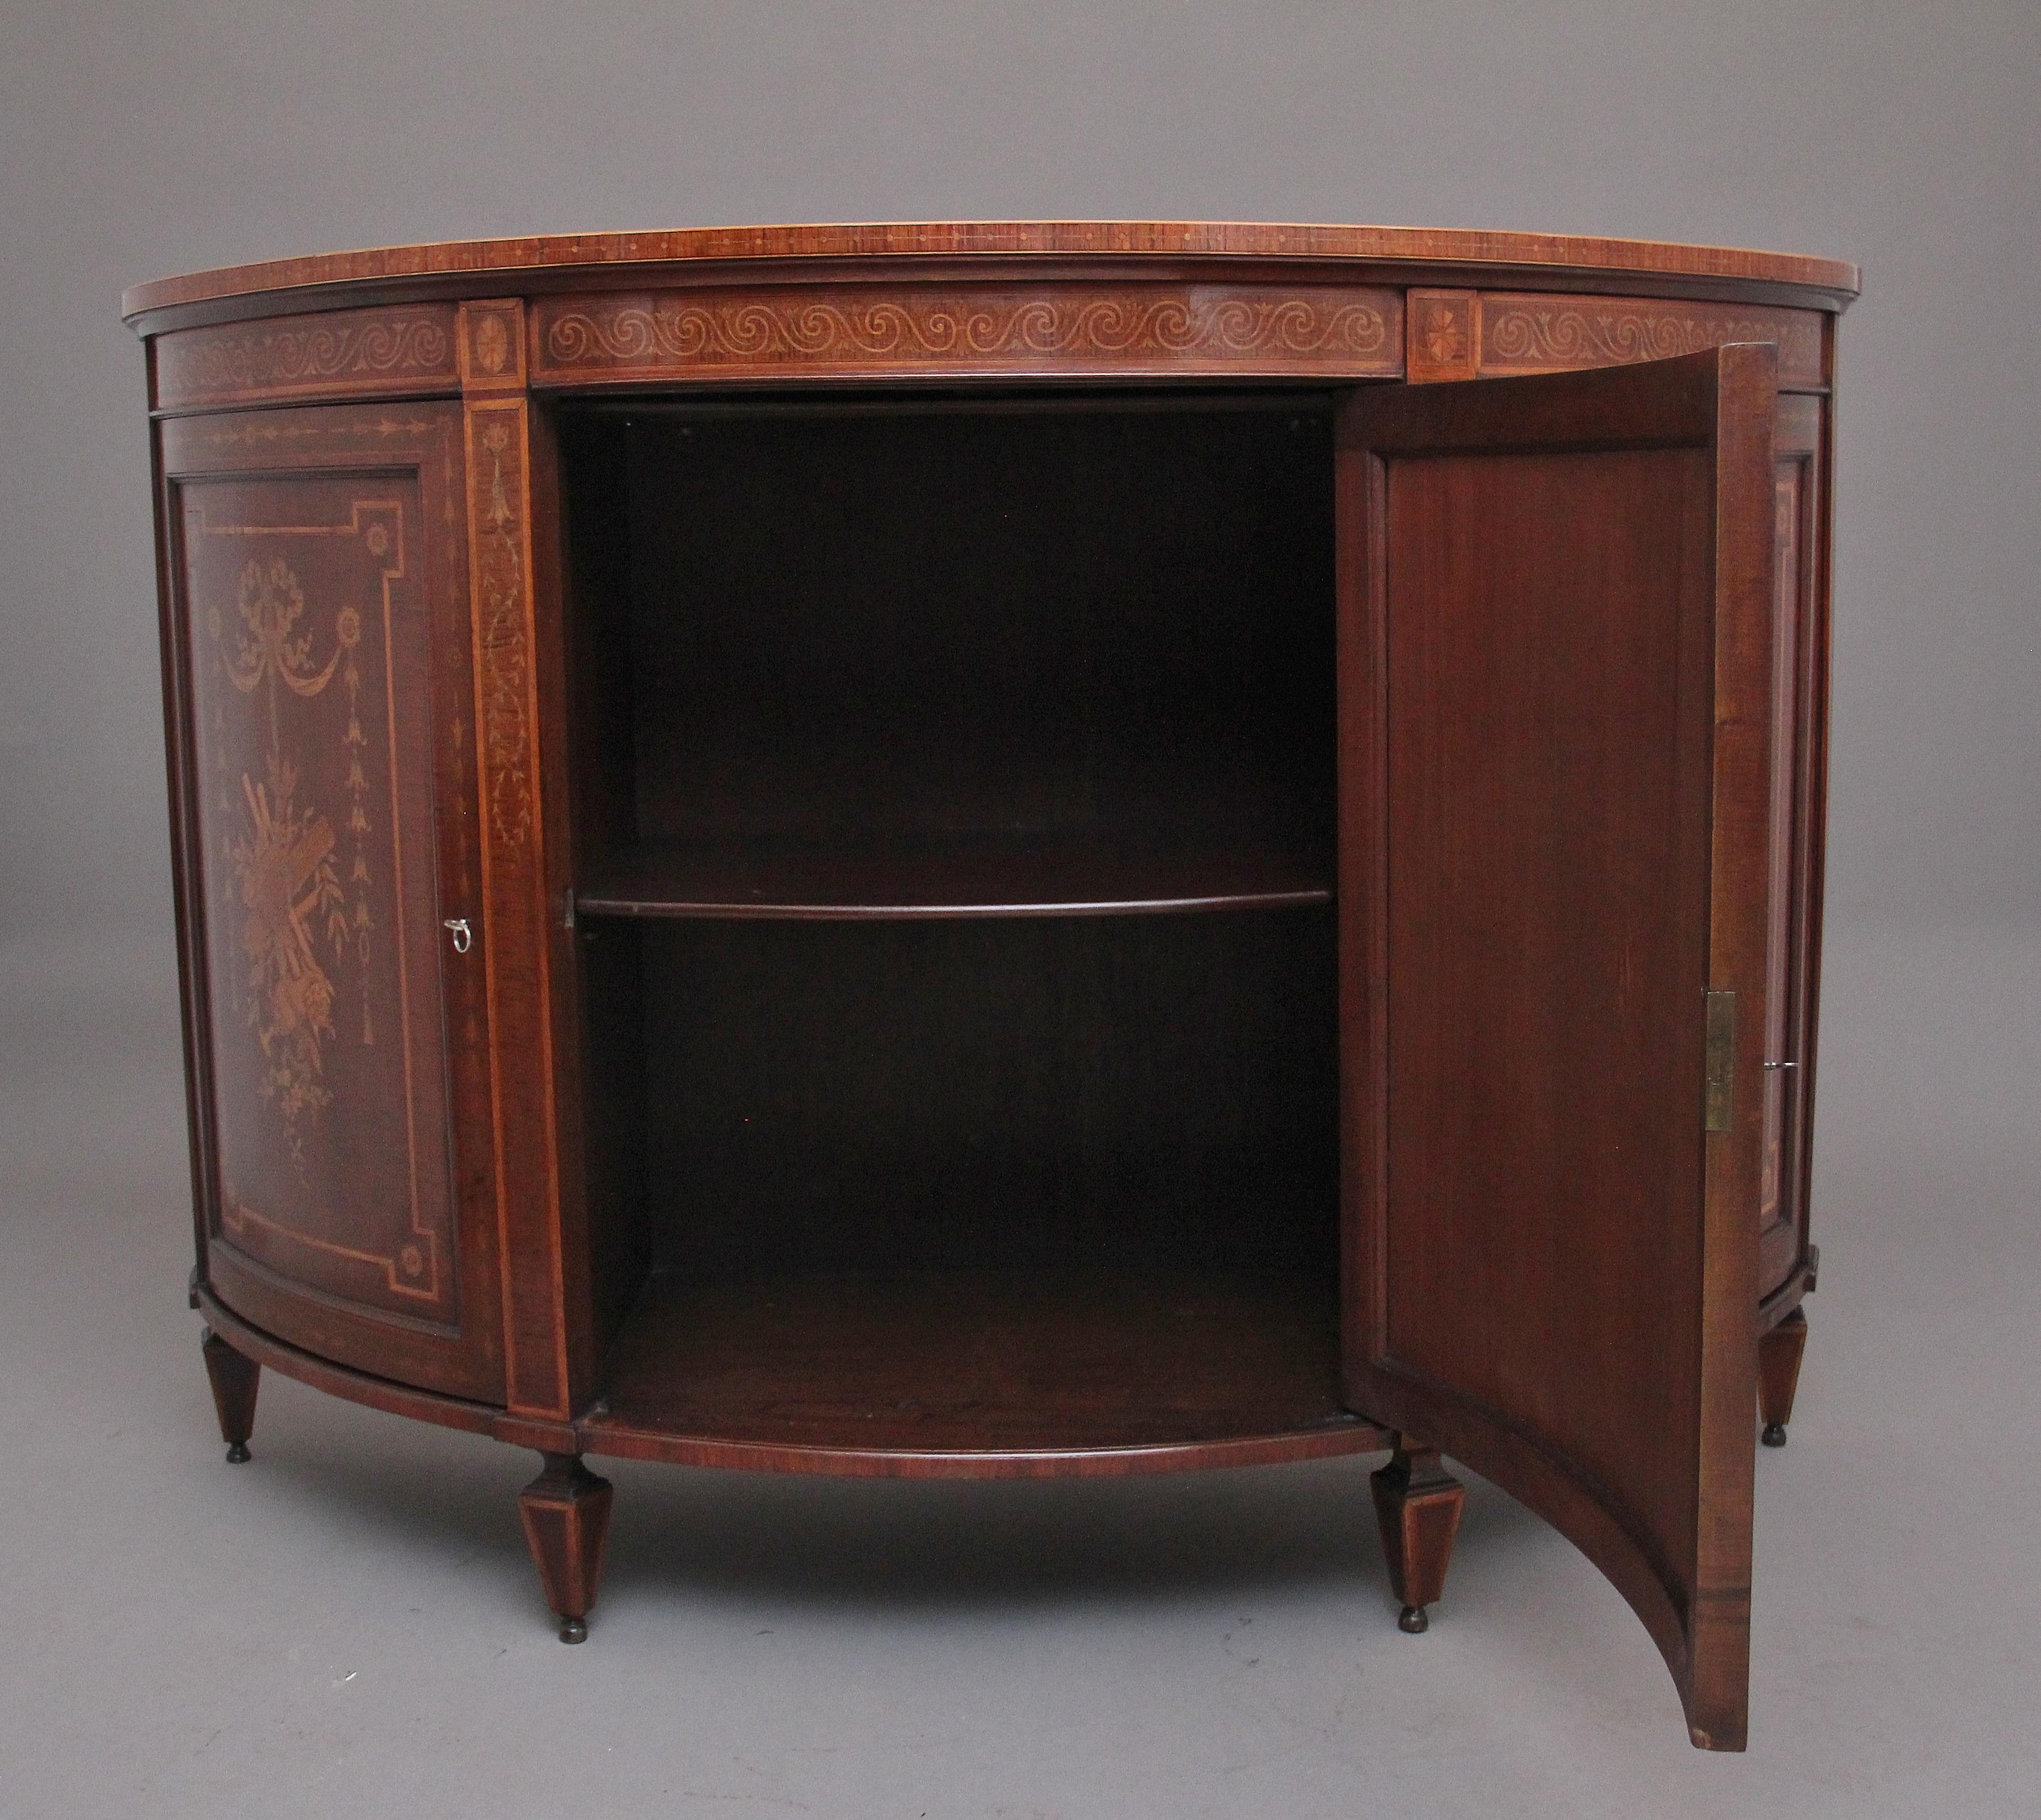 British Fabulous Quality 19th Century Mahogany and Inlaid Cabinet For Sale